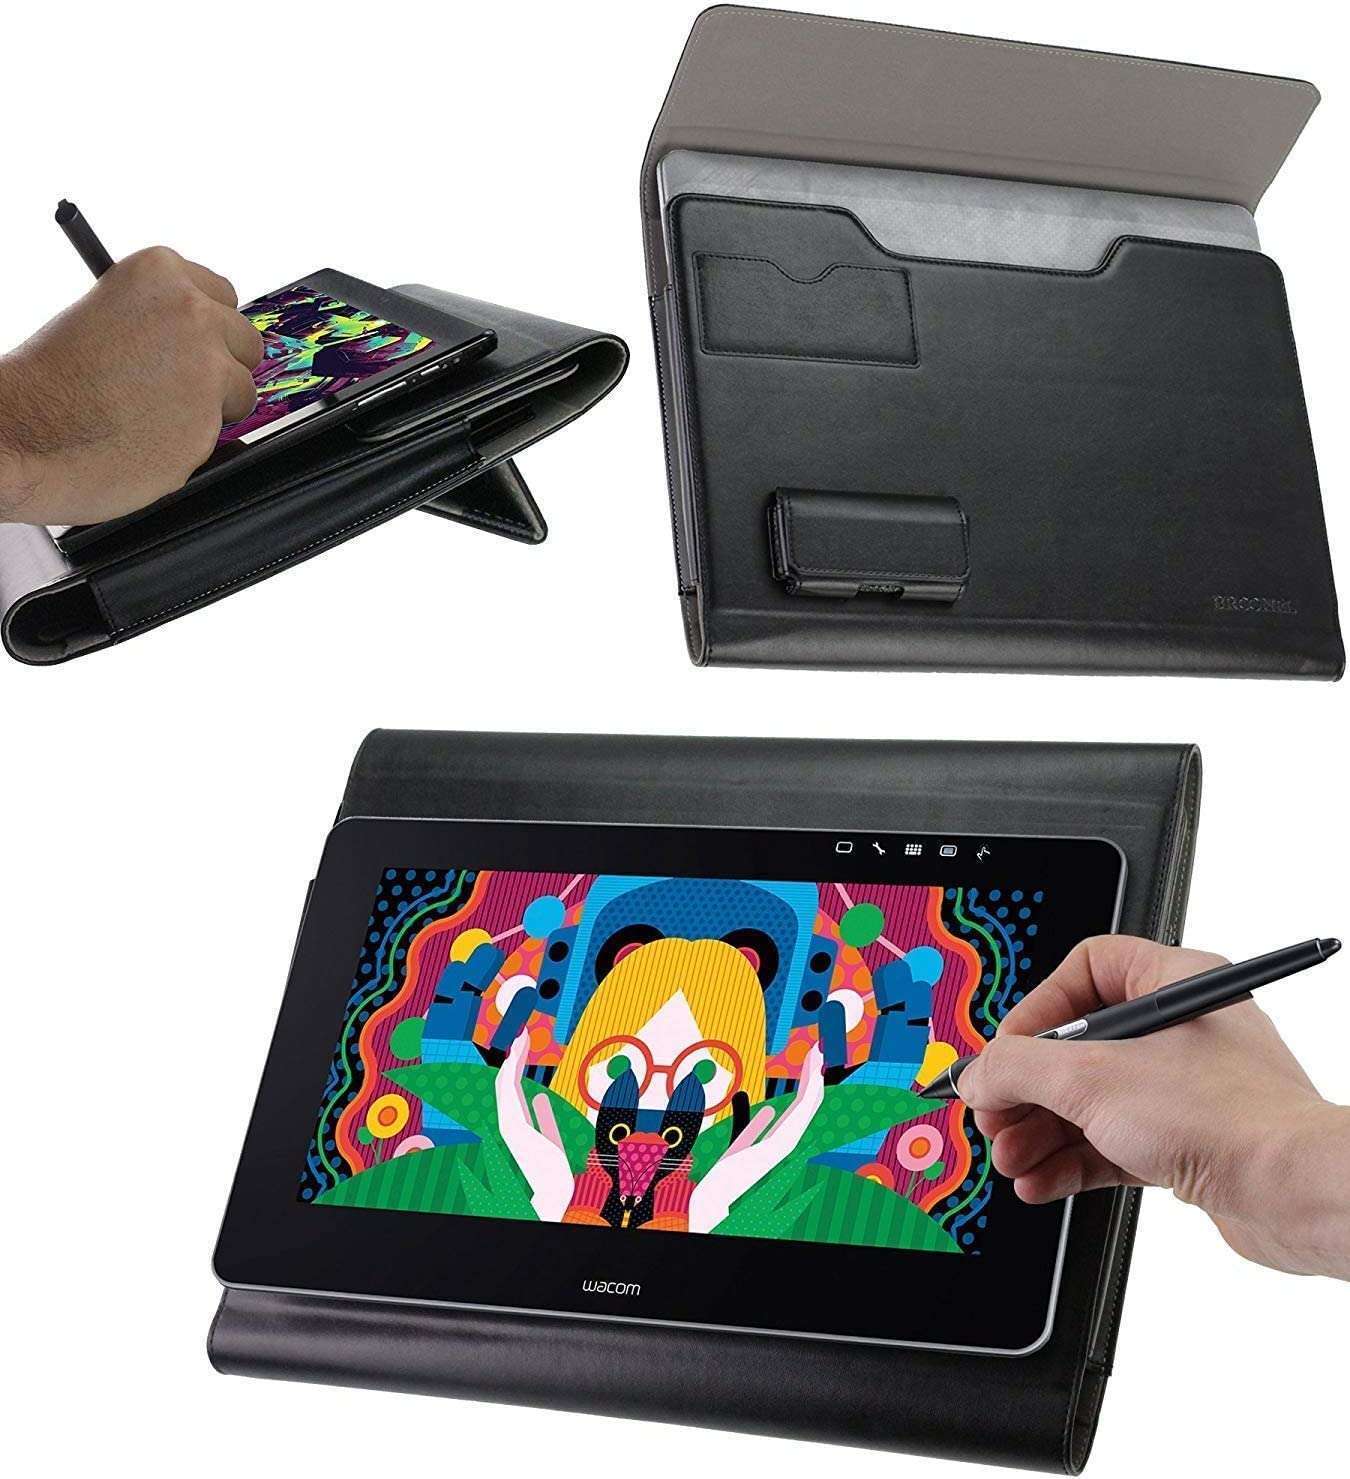 Broonel Leather Graphics Tablet Folio Case For XENCELABS Pen Tablet Medium